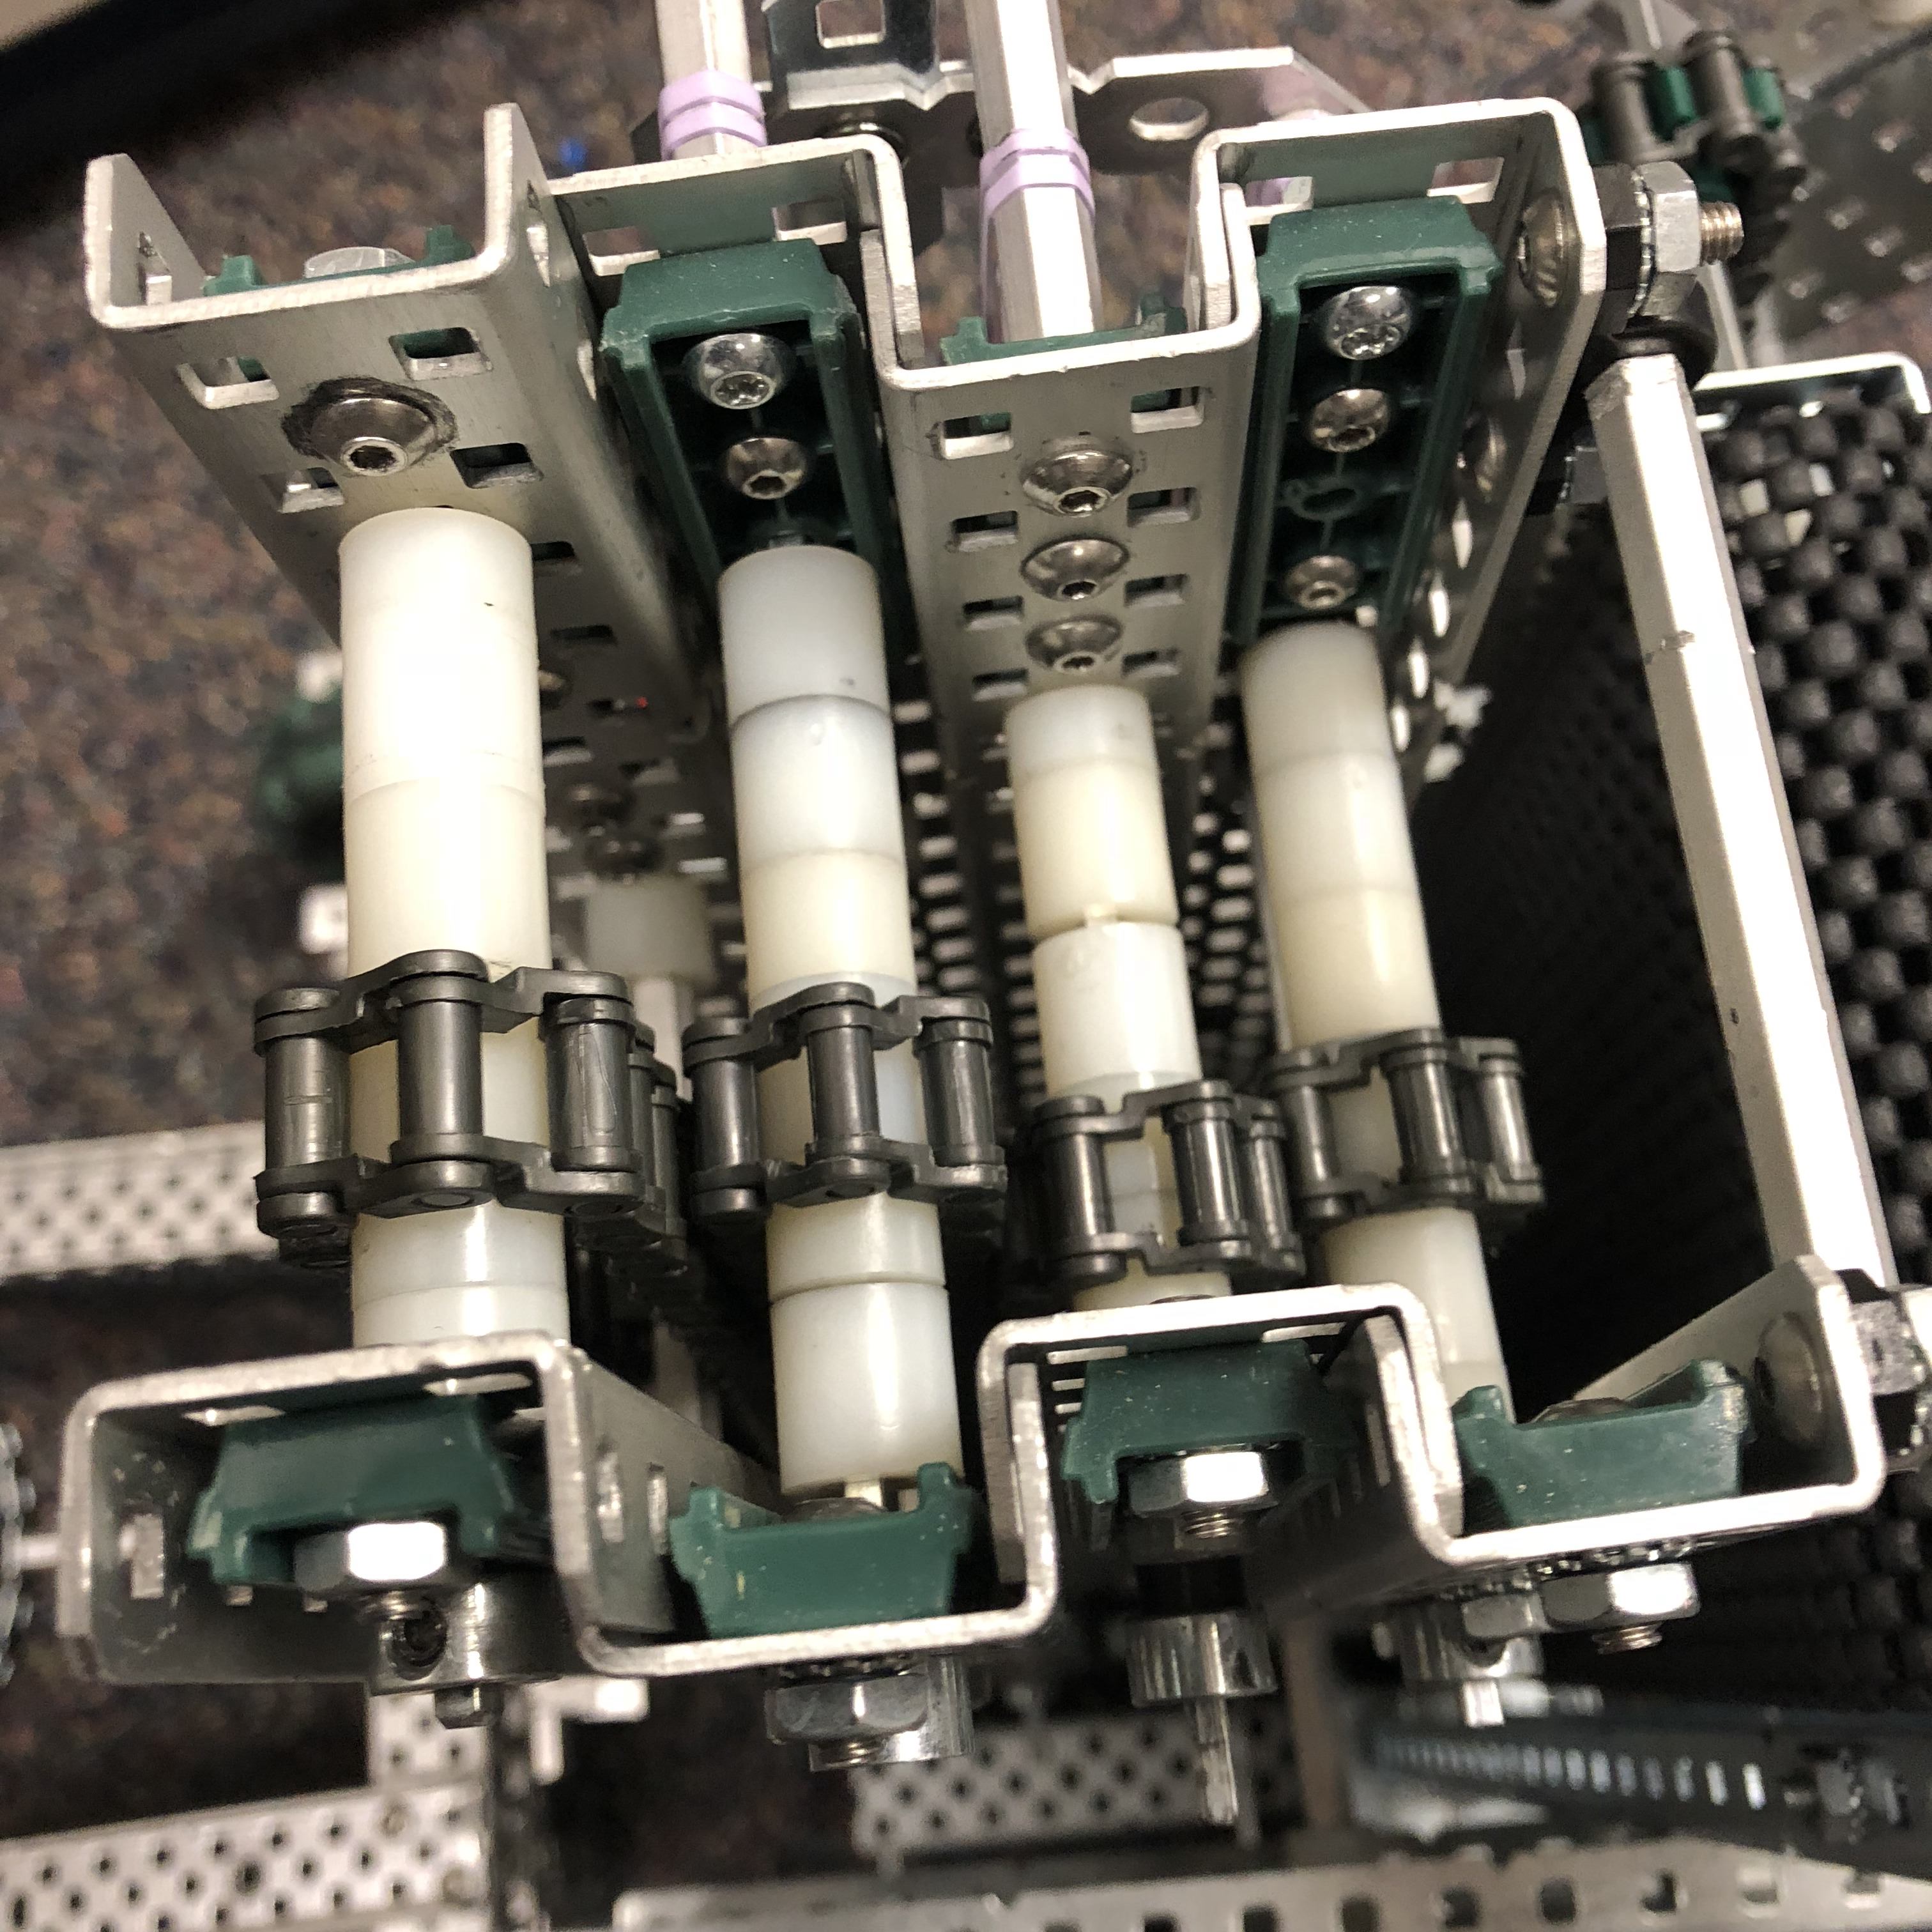 linkage cabbage throne How to make cascade lift - VEX V5 Technical Support - VEX Forum